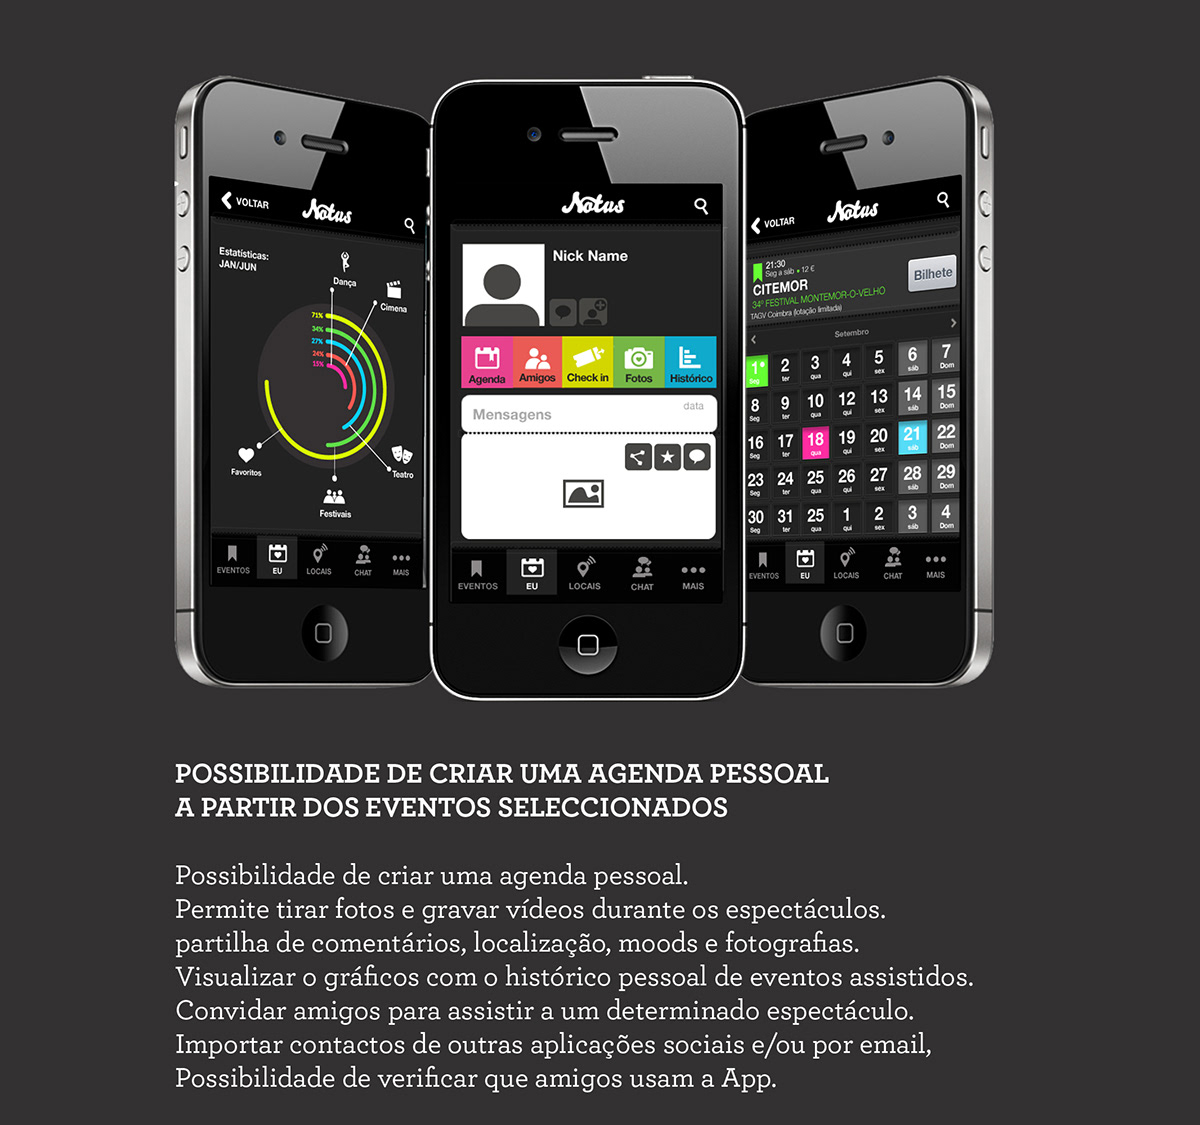 ana paiva design app apps mobile application iphone user experience